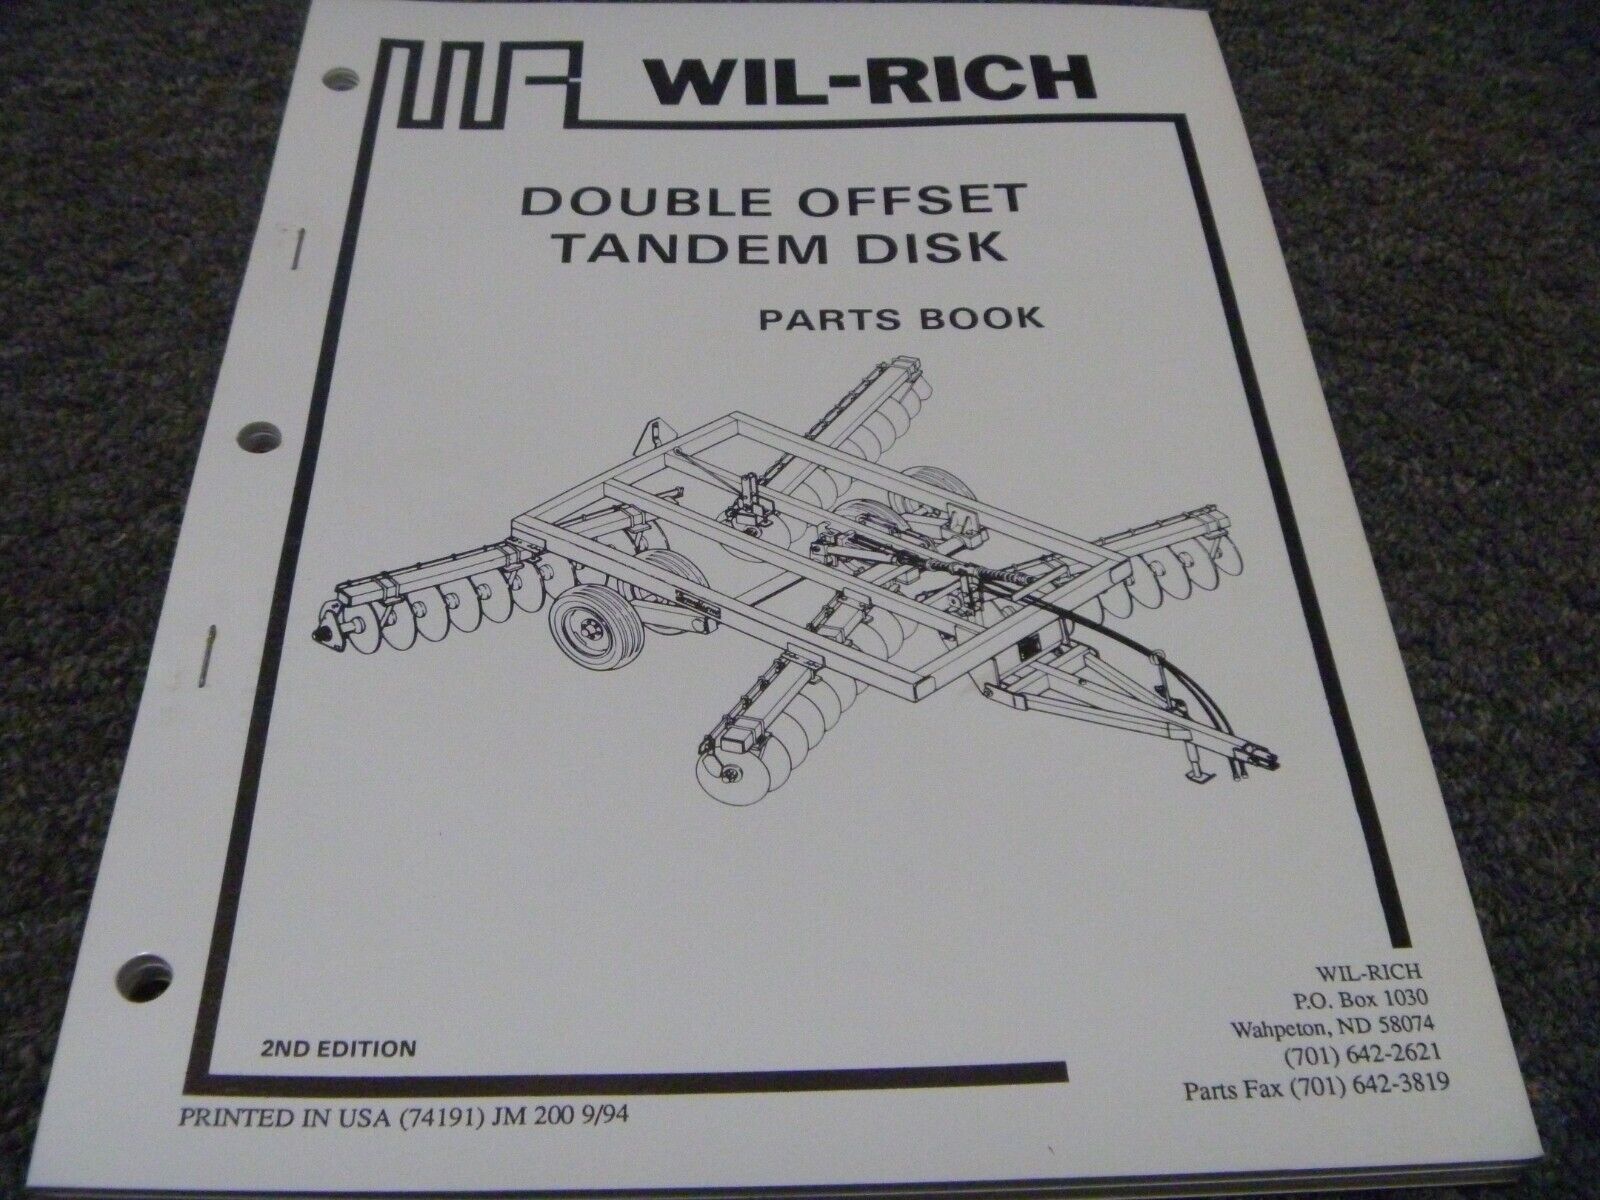 Wil-Rich 7410 7420 7510 7520 7610 7620 Double Offset Tandem Disk Parts Catalog